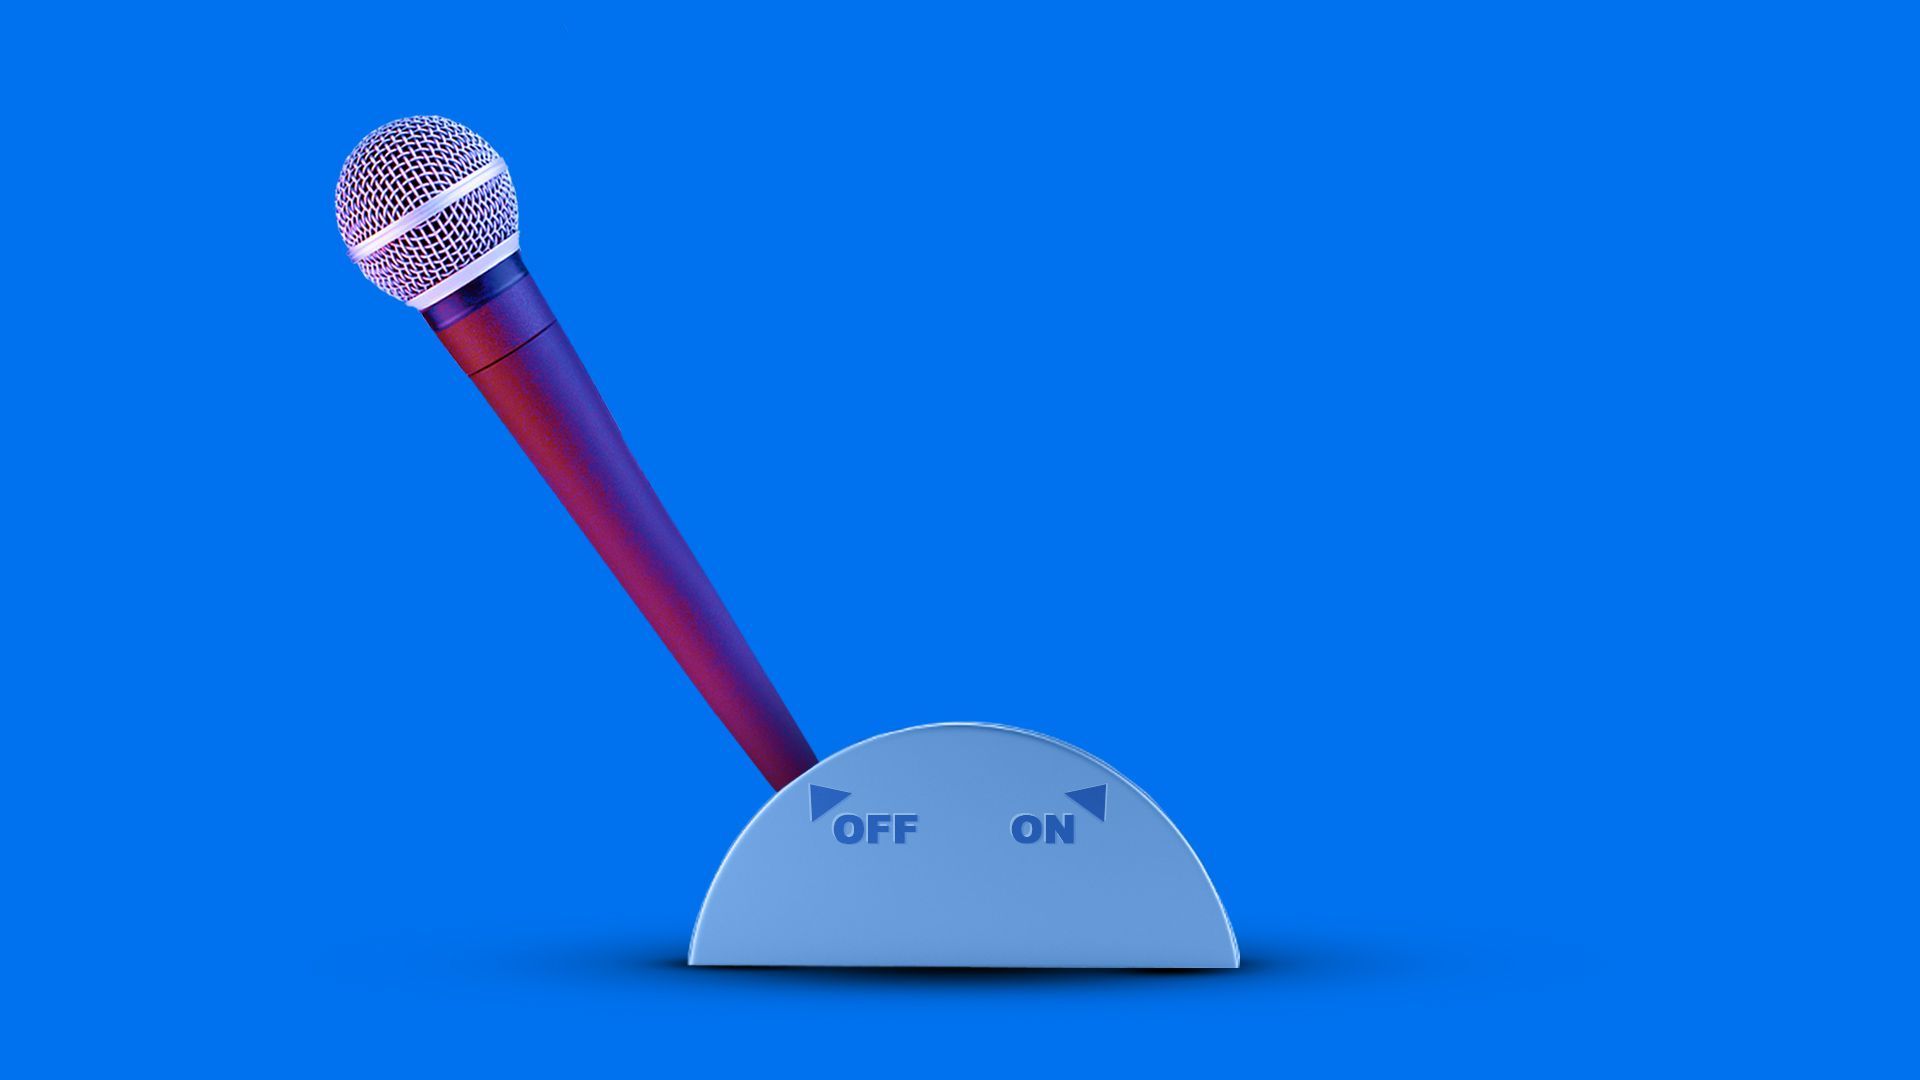 Illustration of a microphone as a lever in the OFF position